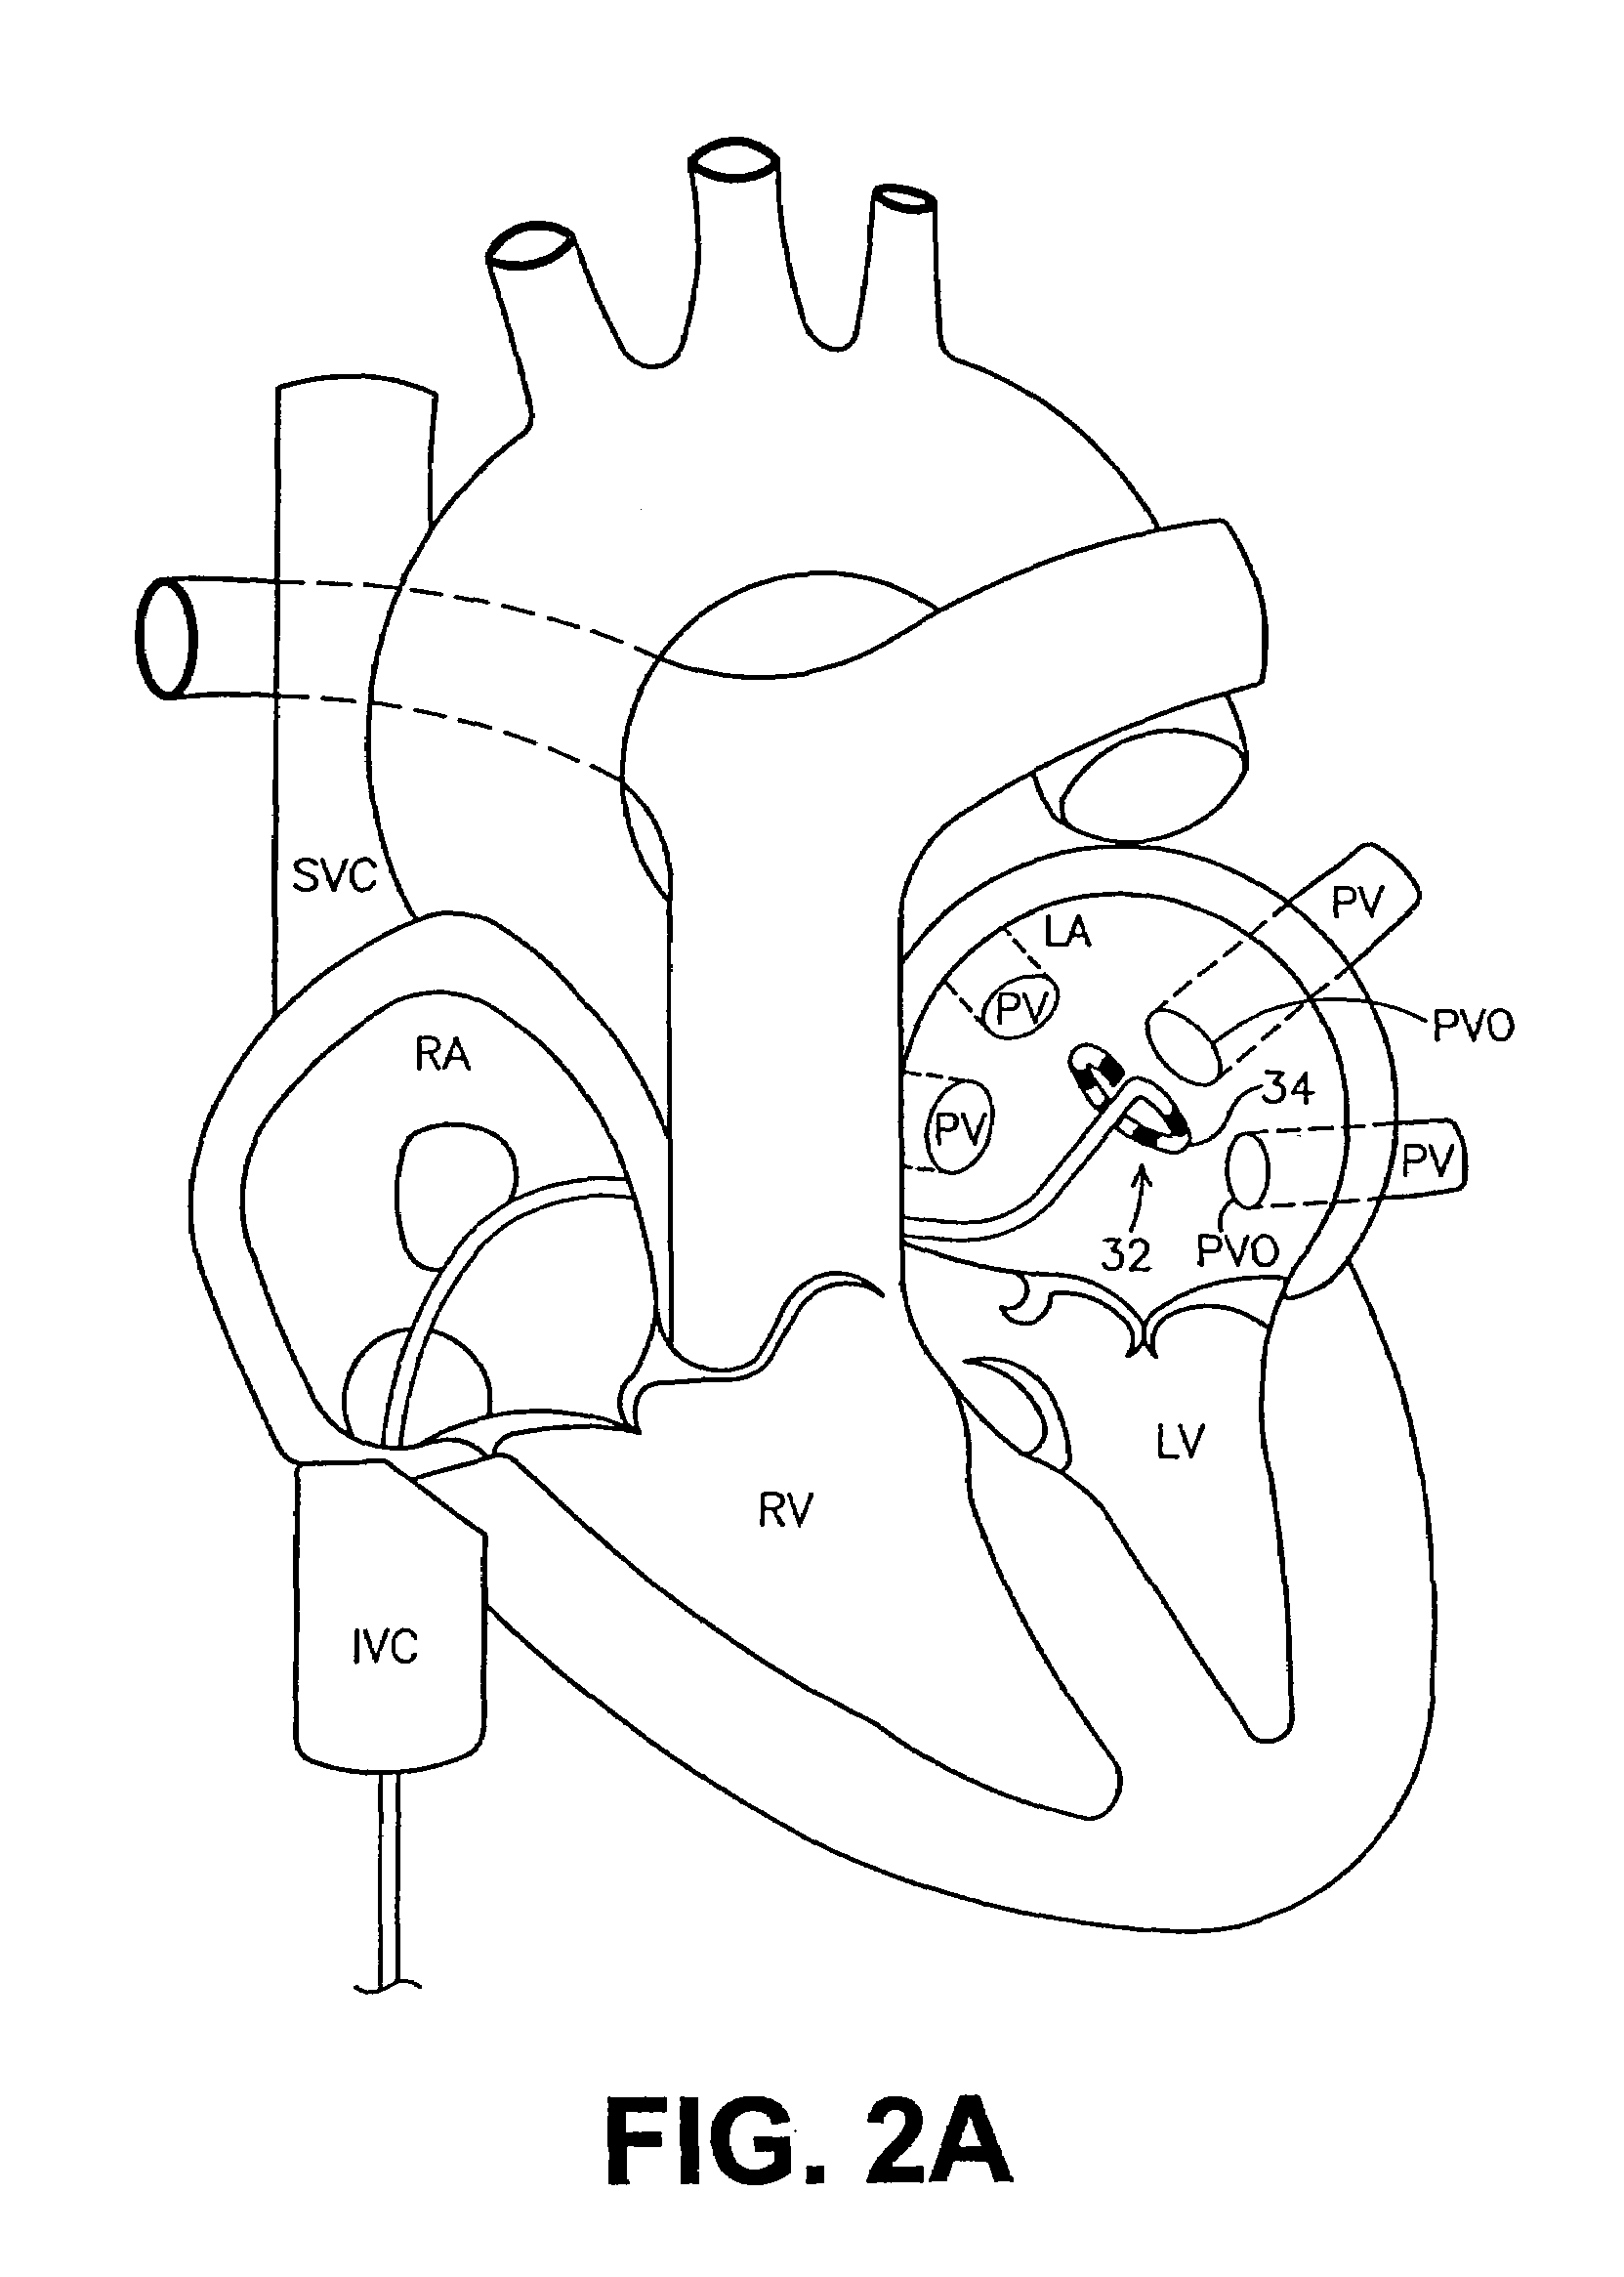 Ablation catheter assembly and method for isolating a pulmonary vein